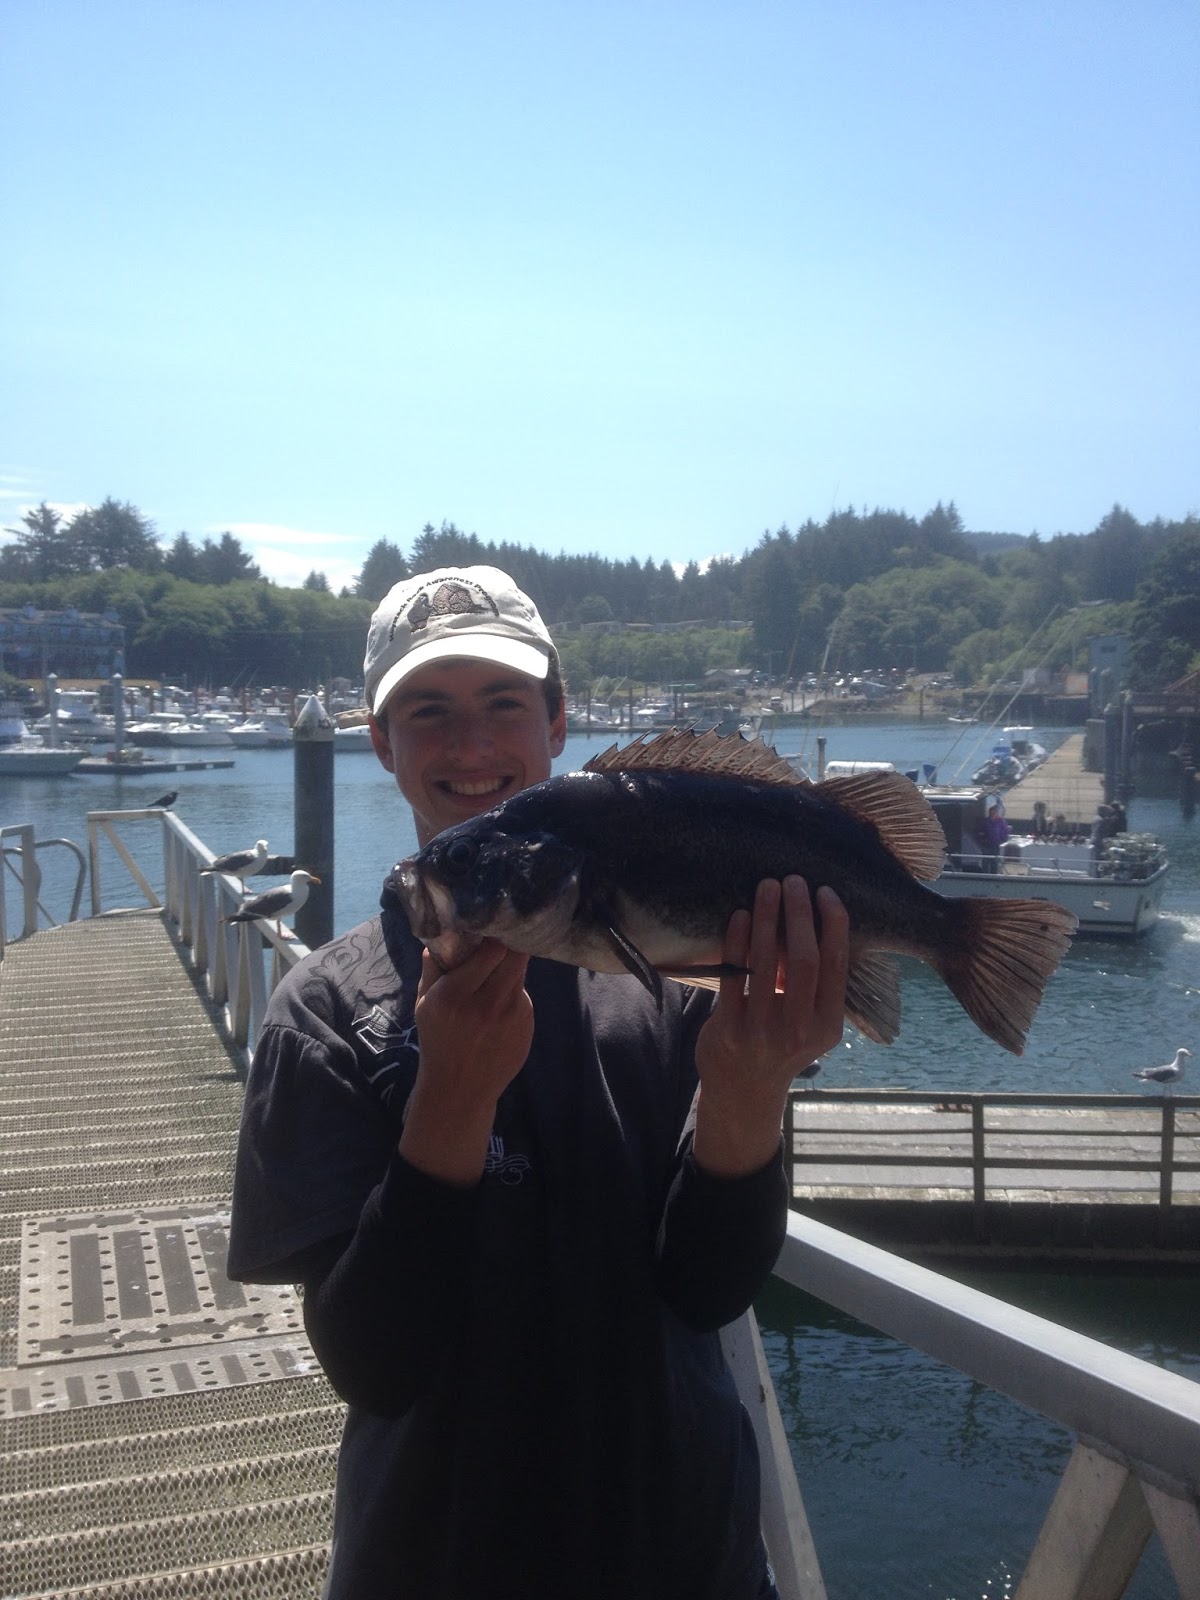 Pacific Northwest Saltwater Fish: A Spooled Fish Profile